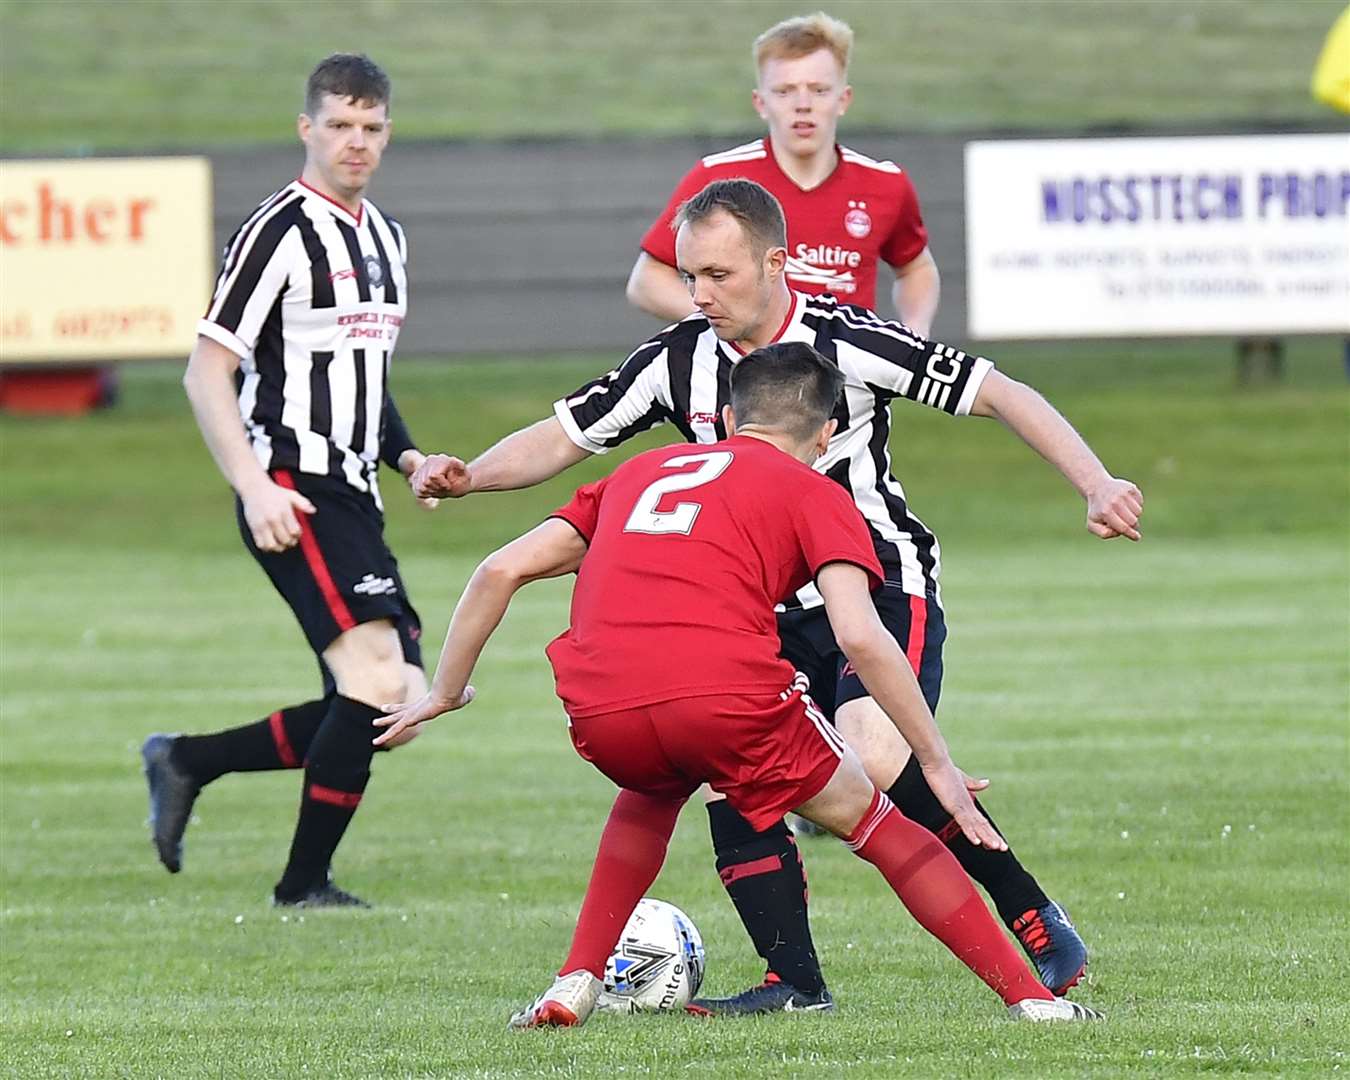 Richard Macadie takes on Aberdeen's Calvin Ramsay during the testimonial match at Harmsworth Park on Tuesday. Picture: Mel Roger